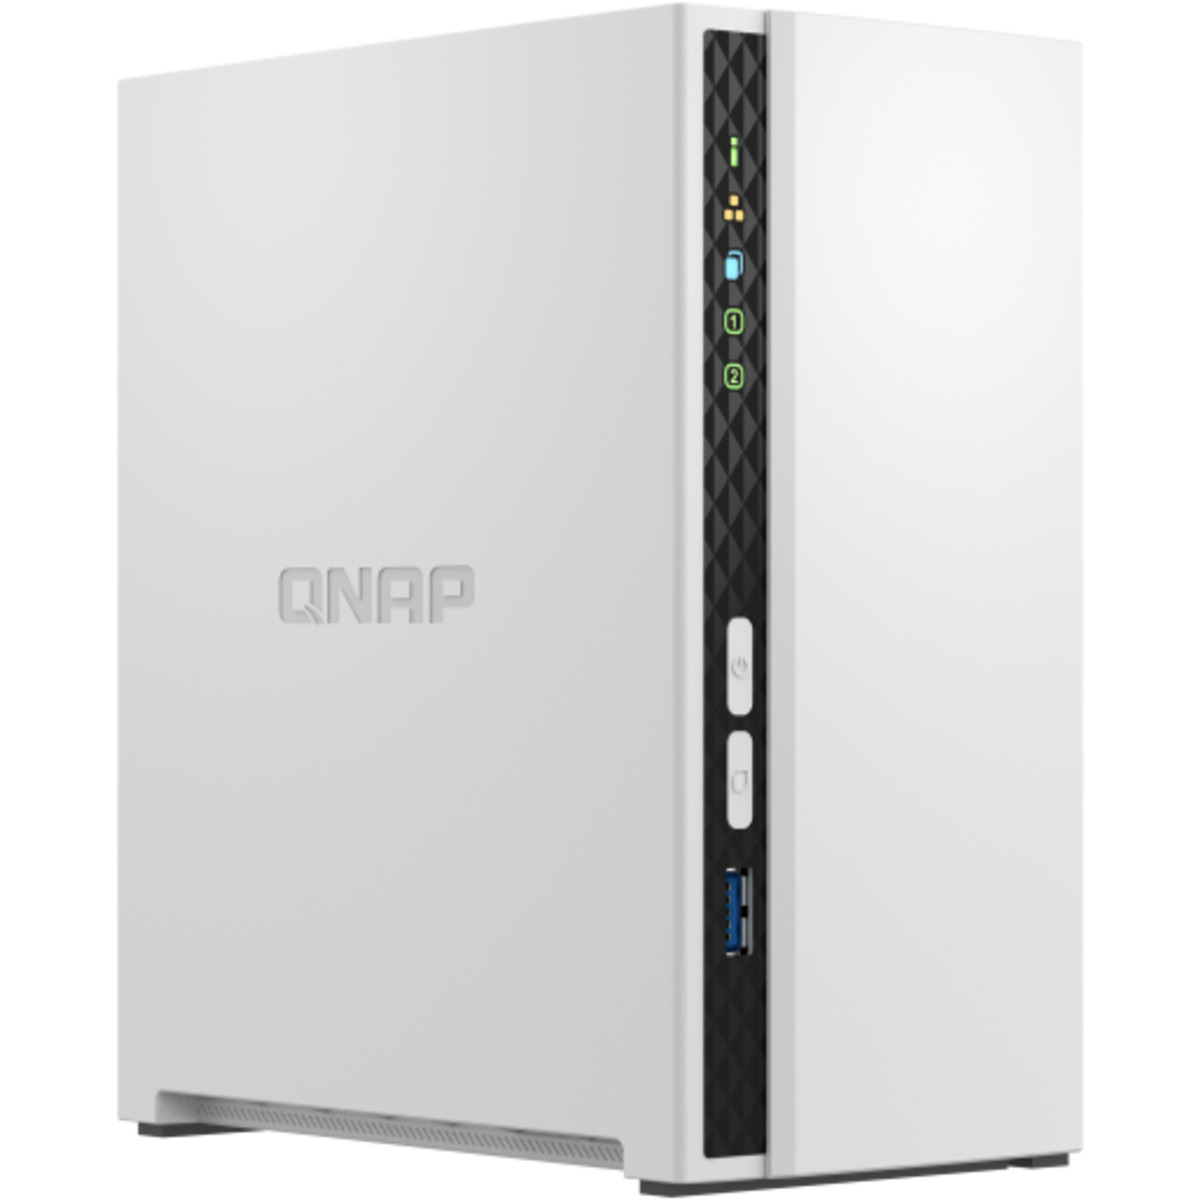 buy $506 QNAP TS-233 4tb Desktop NAS - Network Attached Storage Device 2x2000gb Seagate IronWolf Pro ST2000NT001 3.5 7200rpm SATA 6Gb/s HDD NAS Class Drives Installed - Burn-In Tested - nas headquarters buy network attached storage server device das new raid-5 free shipping simply usa TS-233